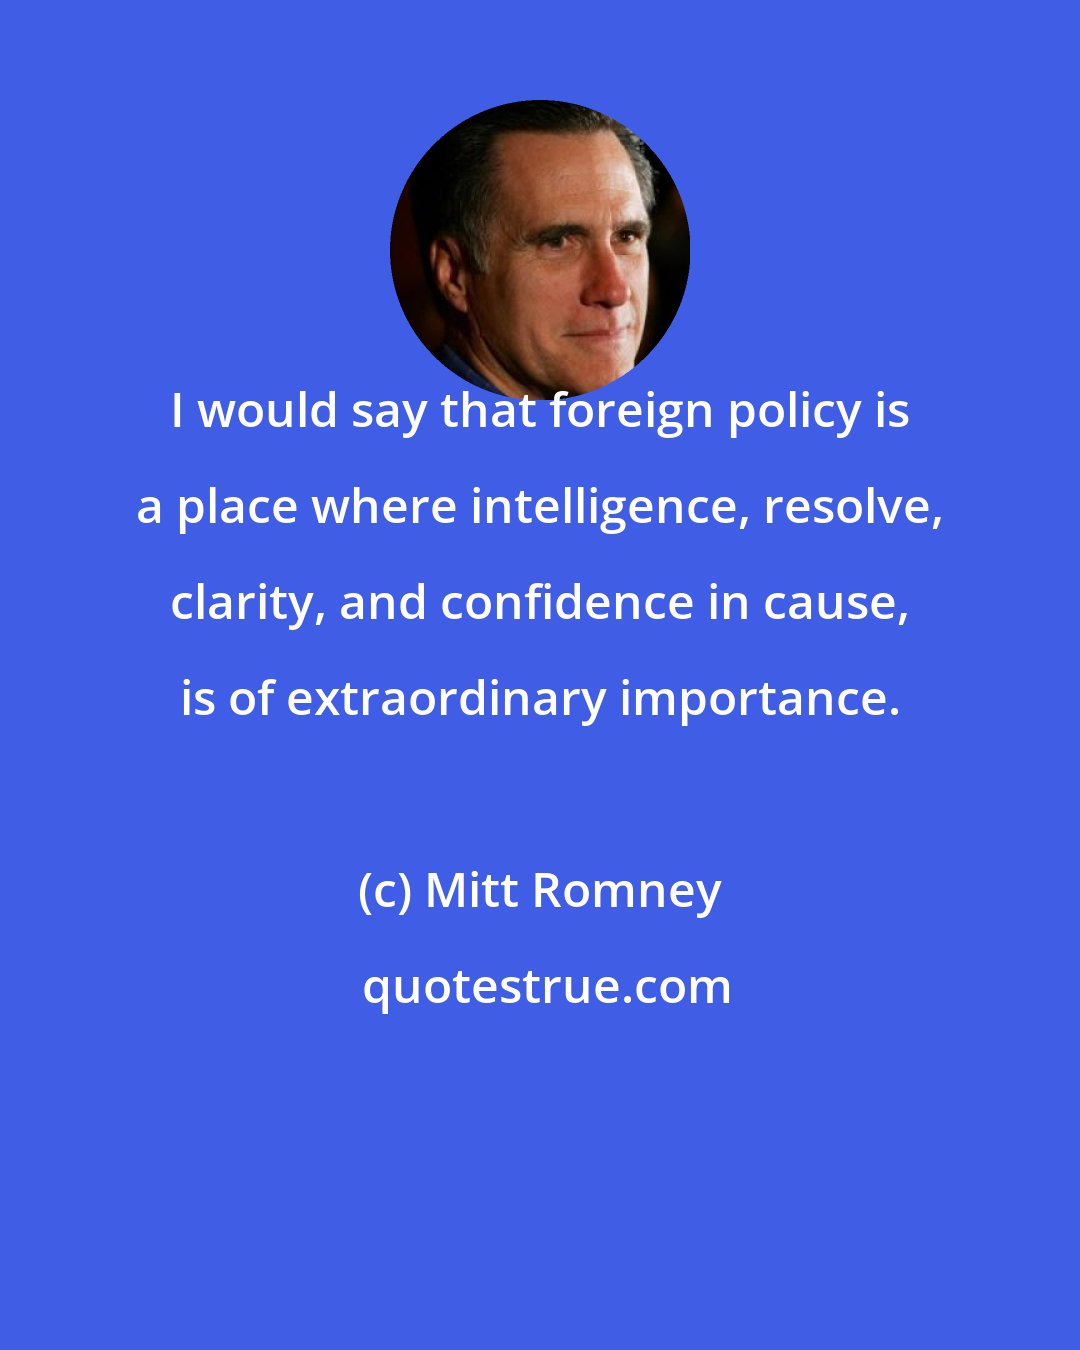 Mitt Romney: I would say that foreign policy is a place where intelligence, resolve, clarity, and confidence in cause, is of extraordinary importance.